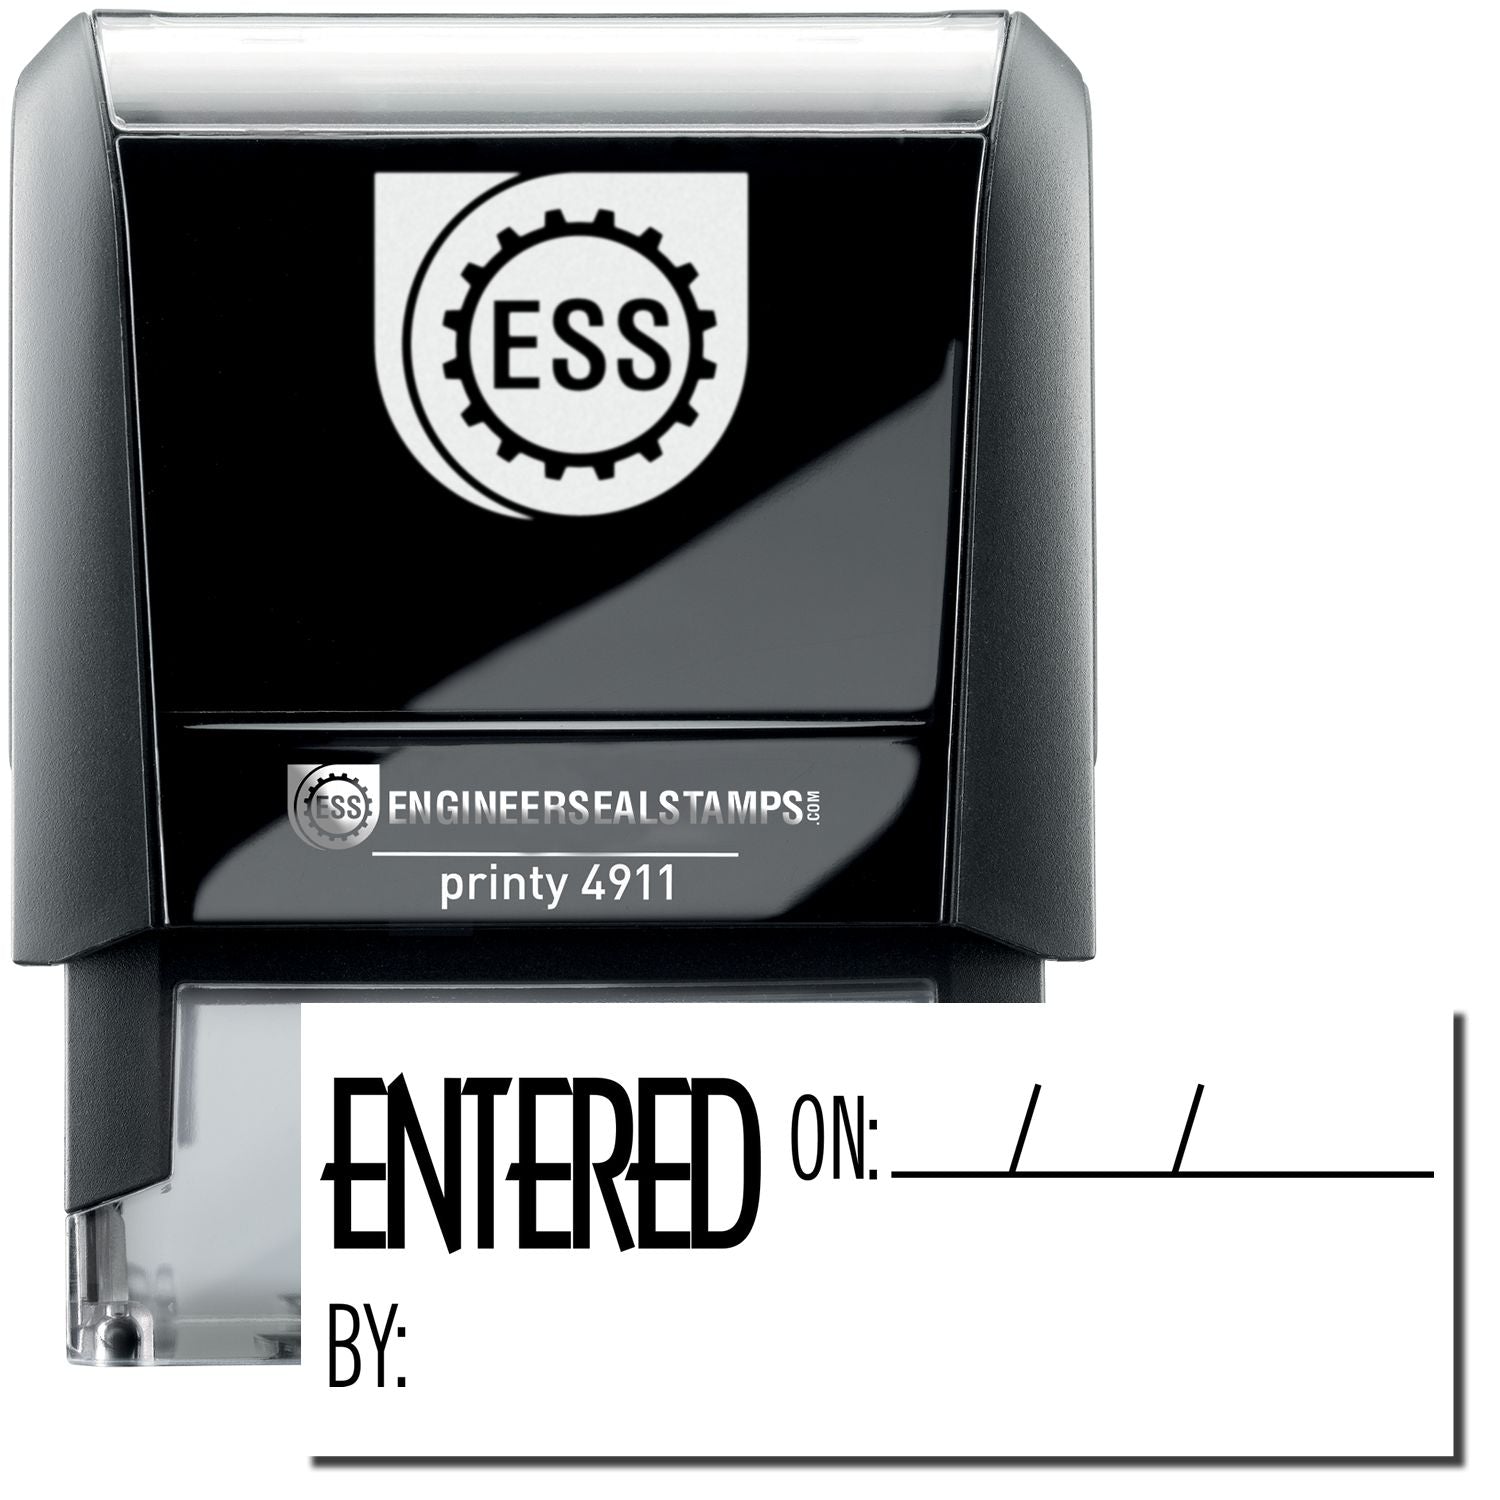 A self-inking stamp with a stamped image showing how the text "ENTERED ON:" with space for mentioning a date is given and under it, the text "BY:" with space for mentioning the name of the person who did the work is given is displayed after stamping.